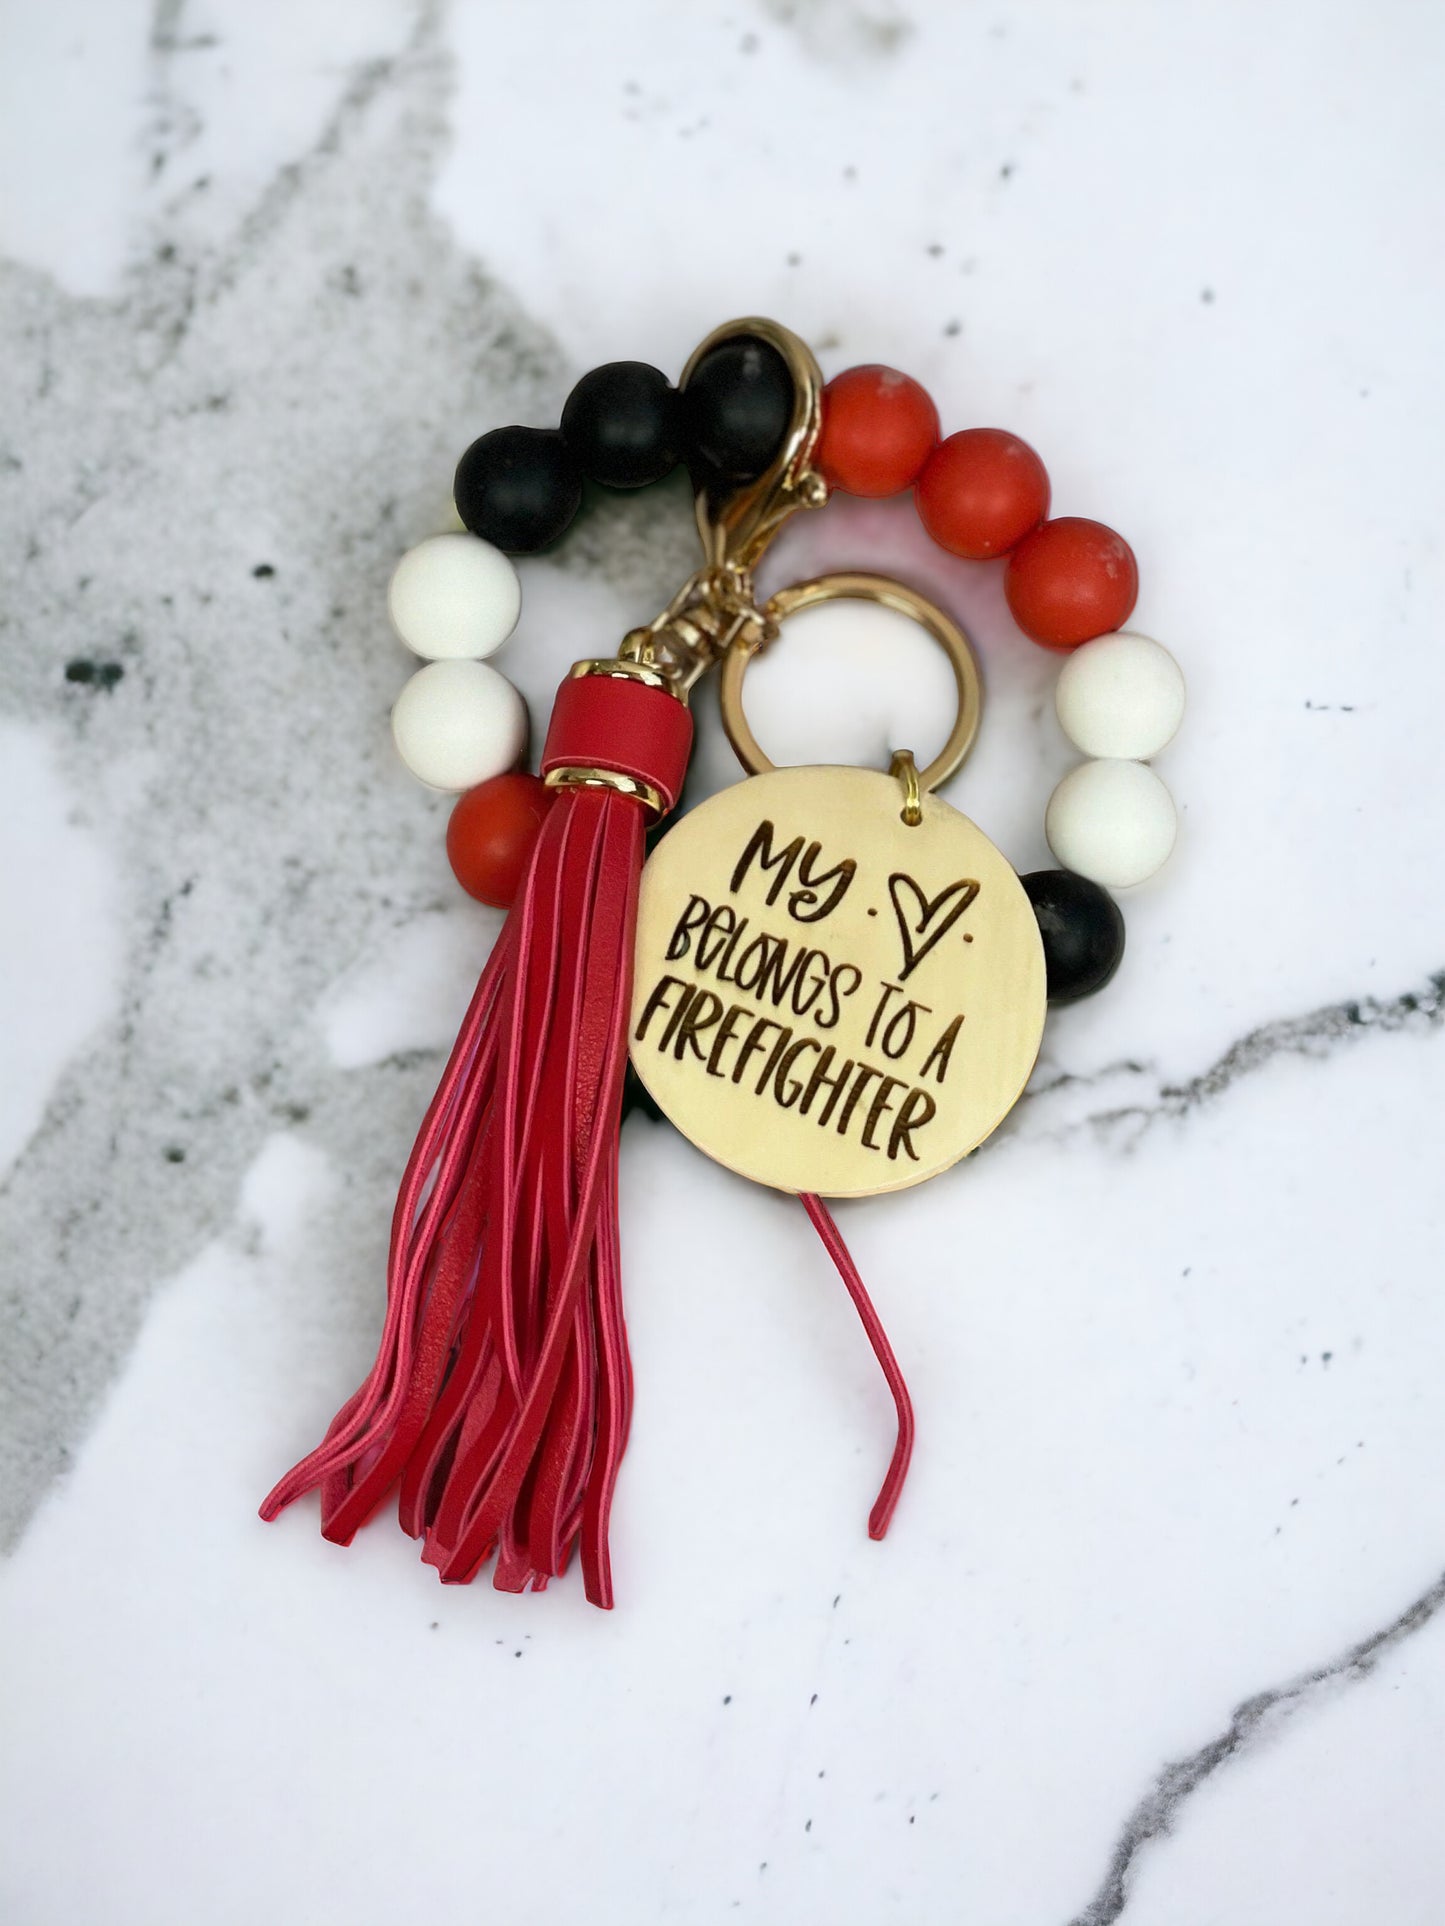 Personalized My Heart Belongs to A Firefighter Beaded Wristlet Keychain | Firefighter Wife Gift | Firefighter Mom | Thin Red Line